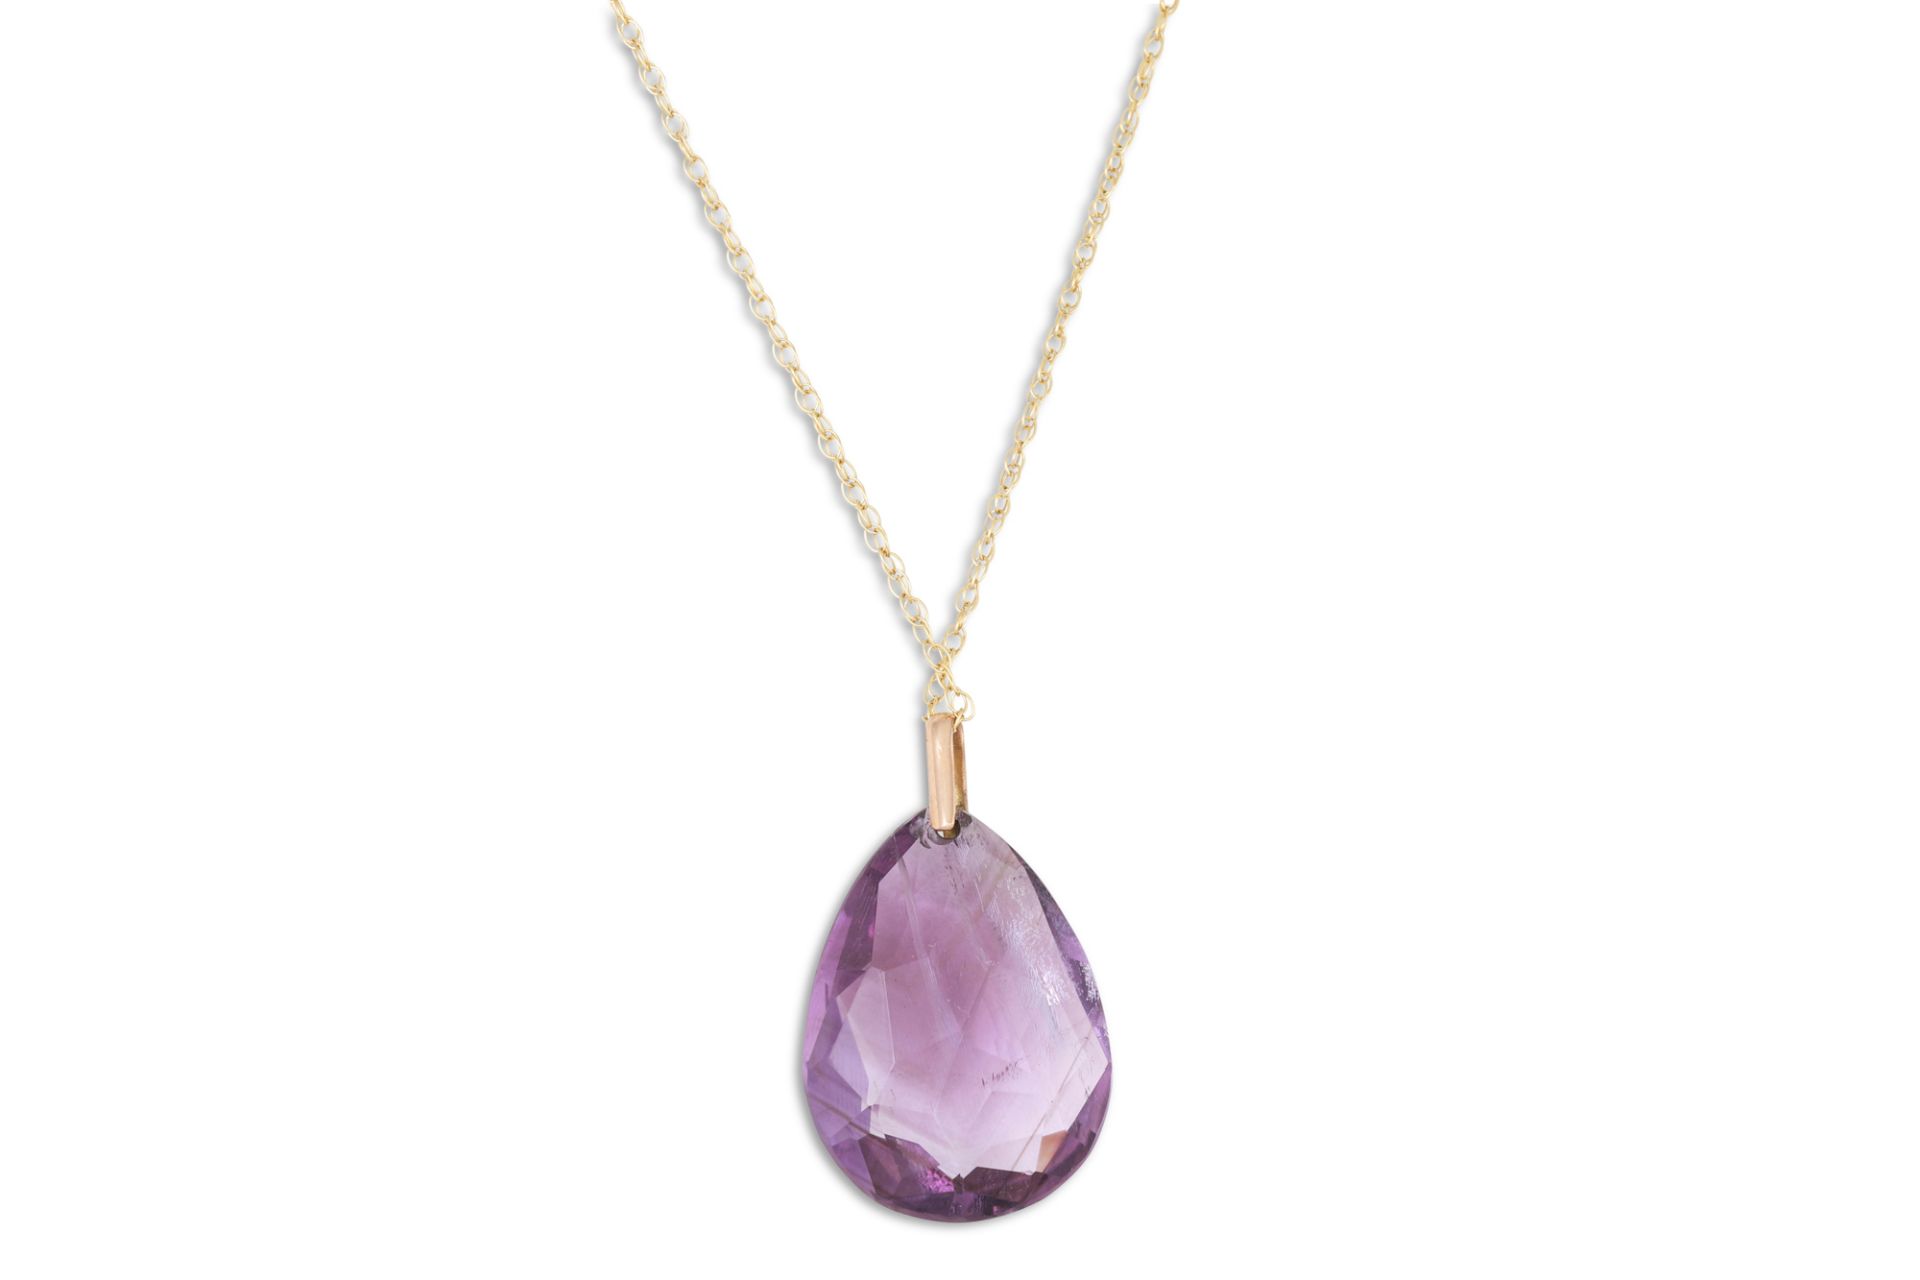 AN AMETHYST PENDANT, the large briolette drop on a 9ct gold chain